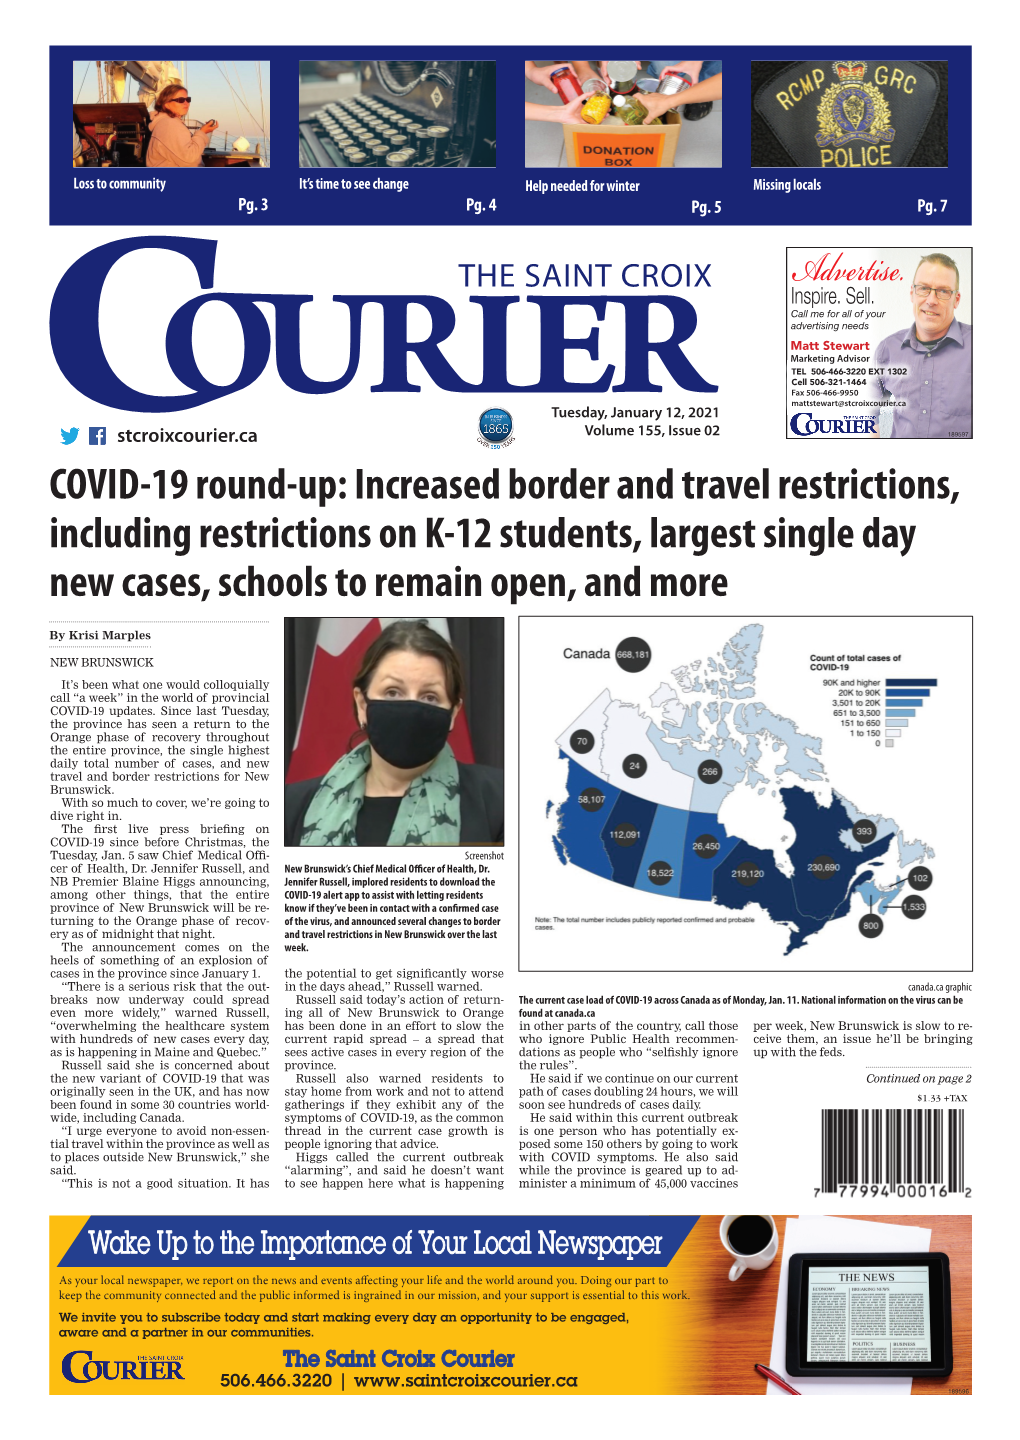 COVID-19 Round-Up: Increased Border and Travel Restrictions, Including Restrictions on K-12 Students, Largest Single Day New Cases, Schools to Remain Open, and More